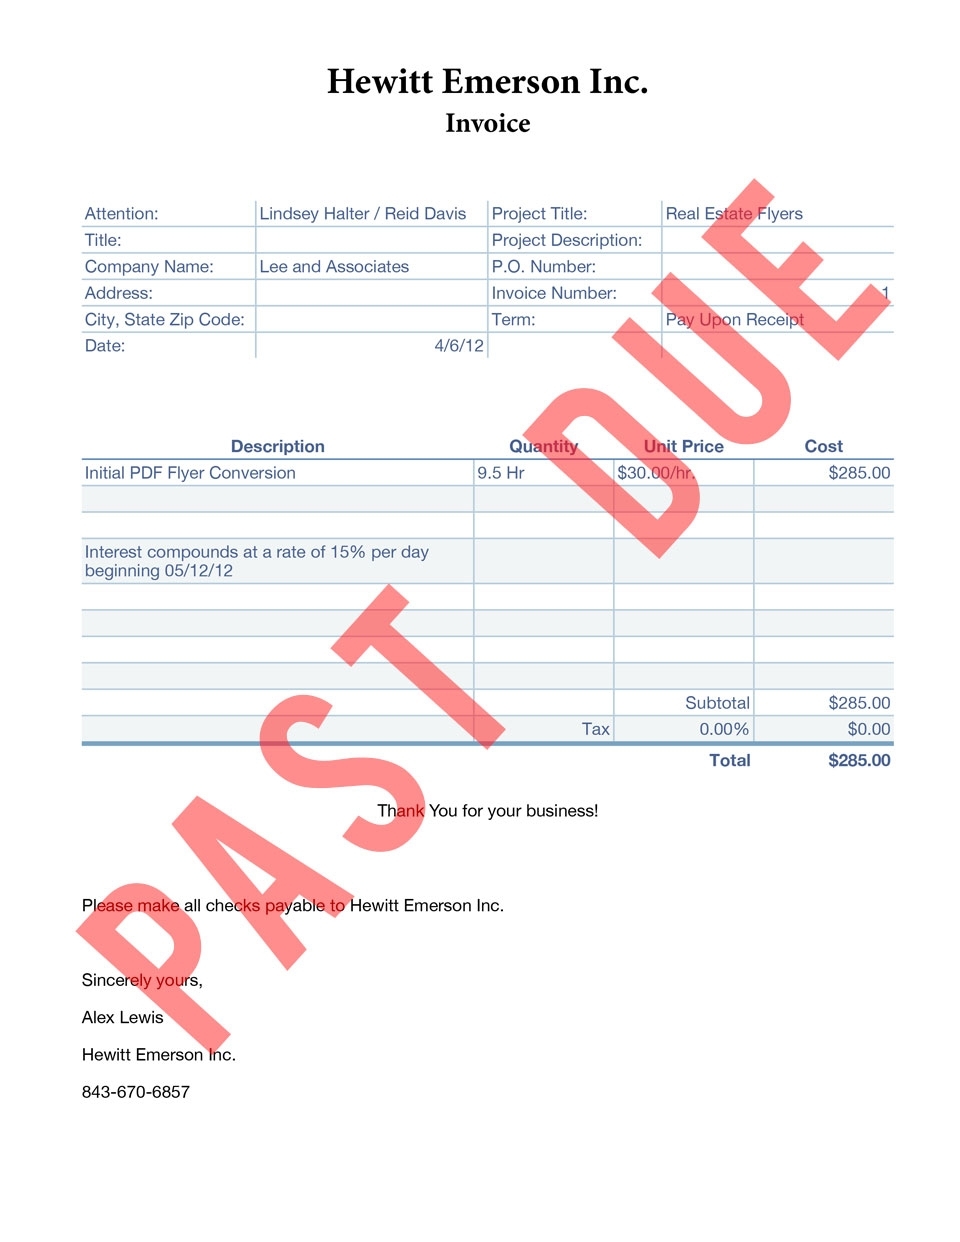 past due invoice | invoice template free 2016 invoice past due